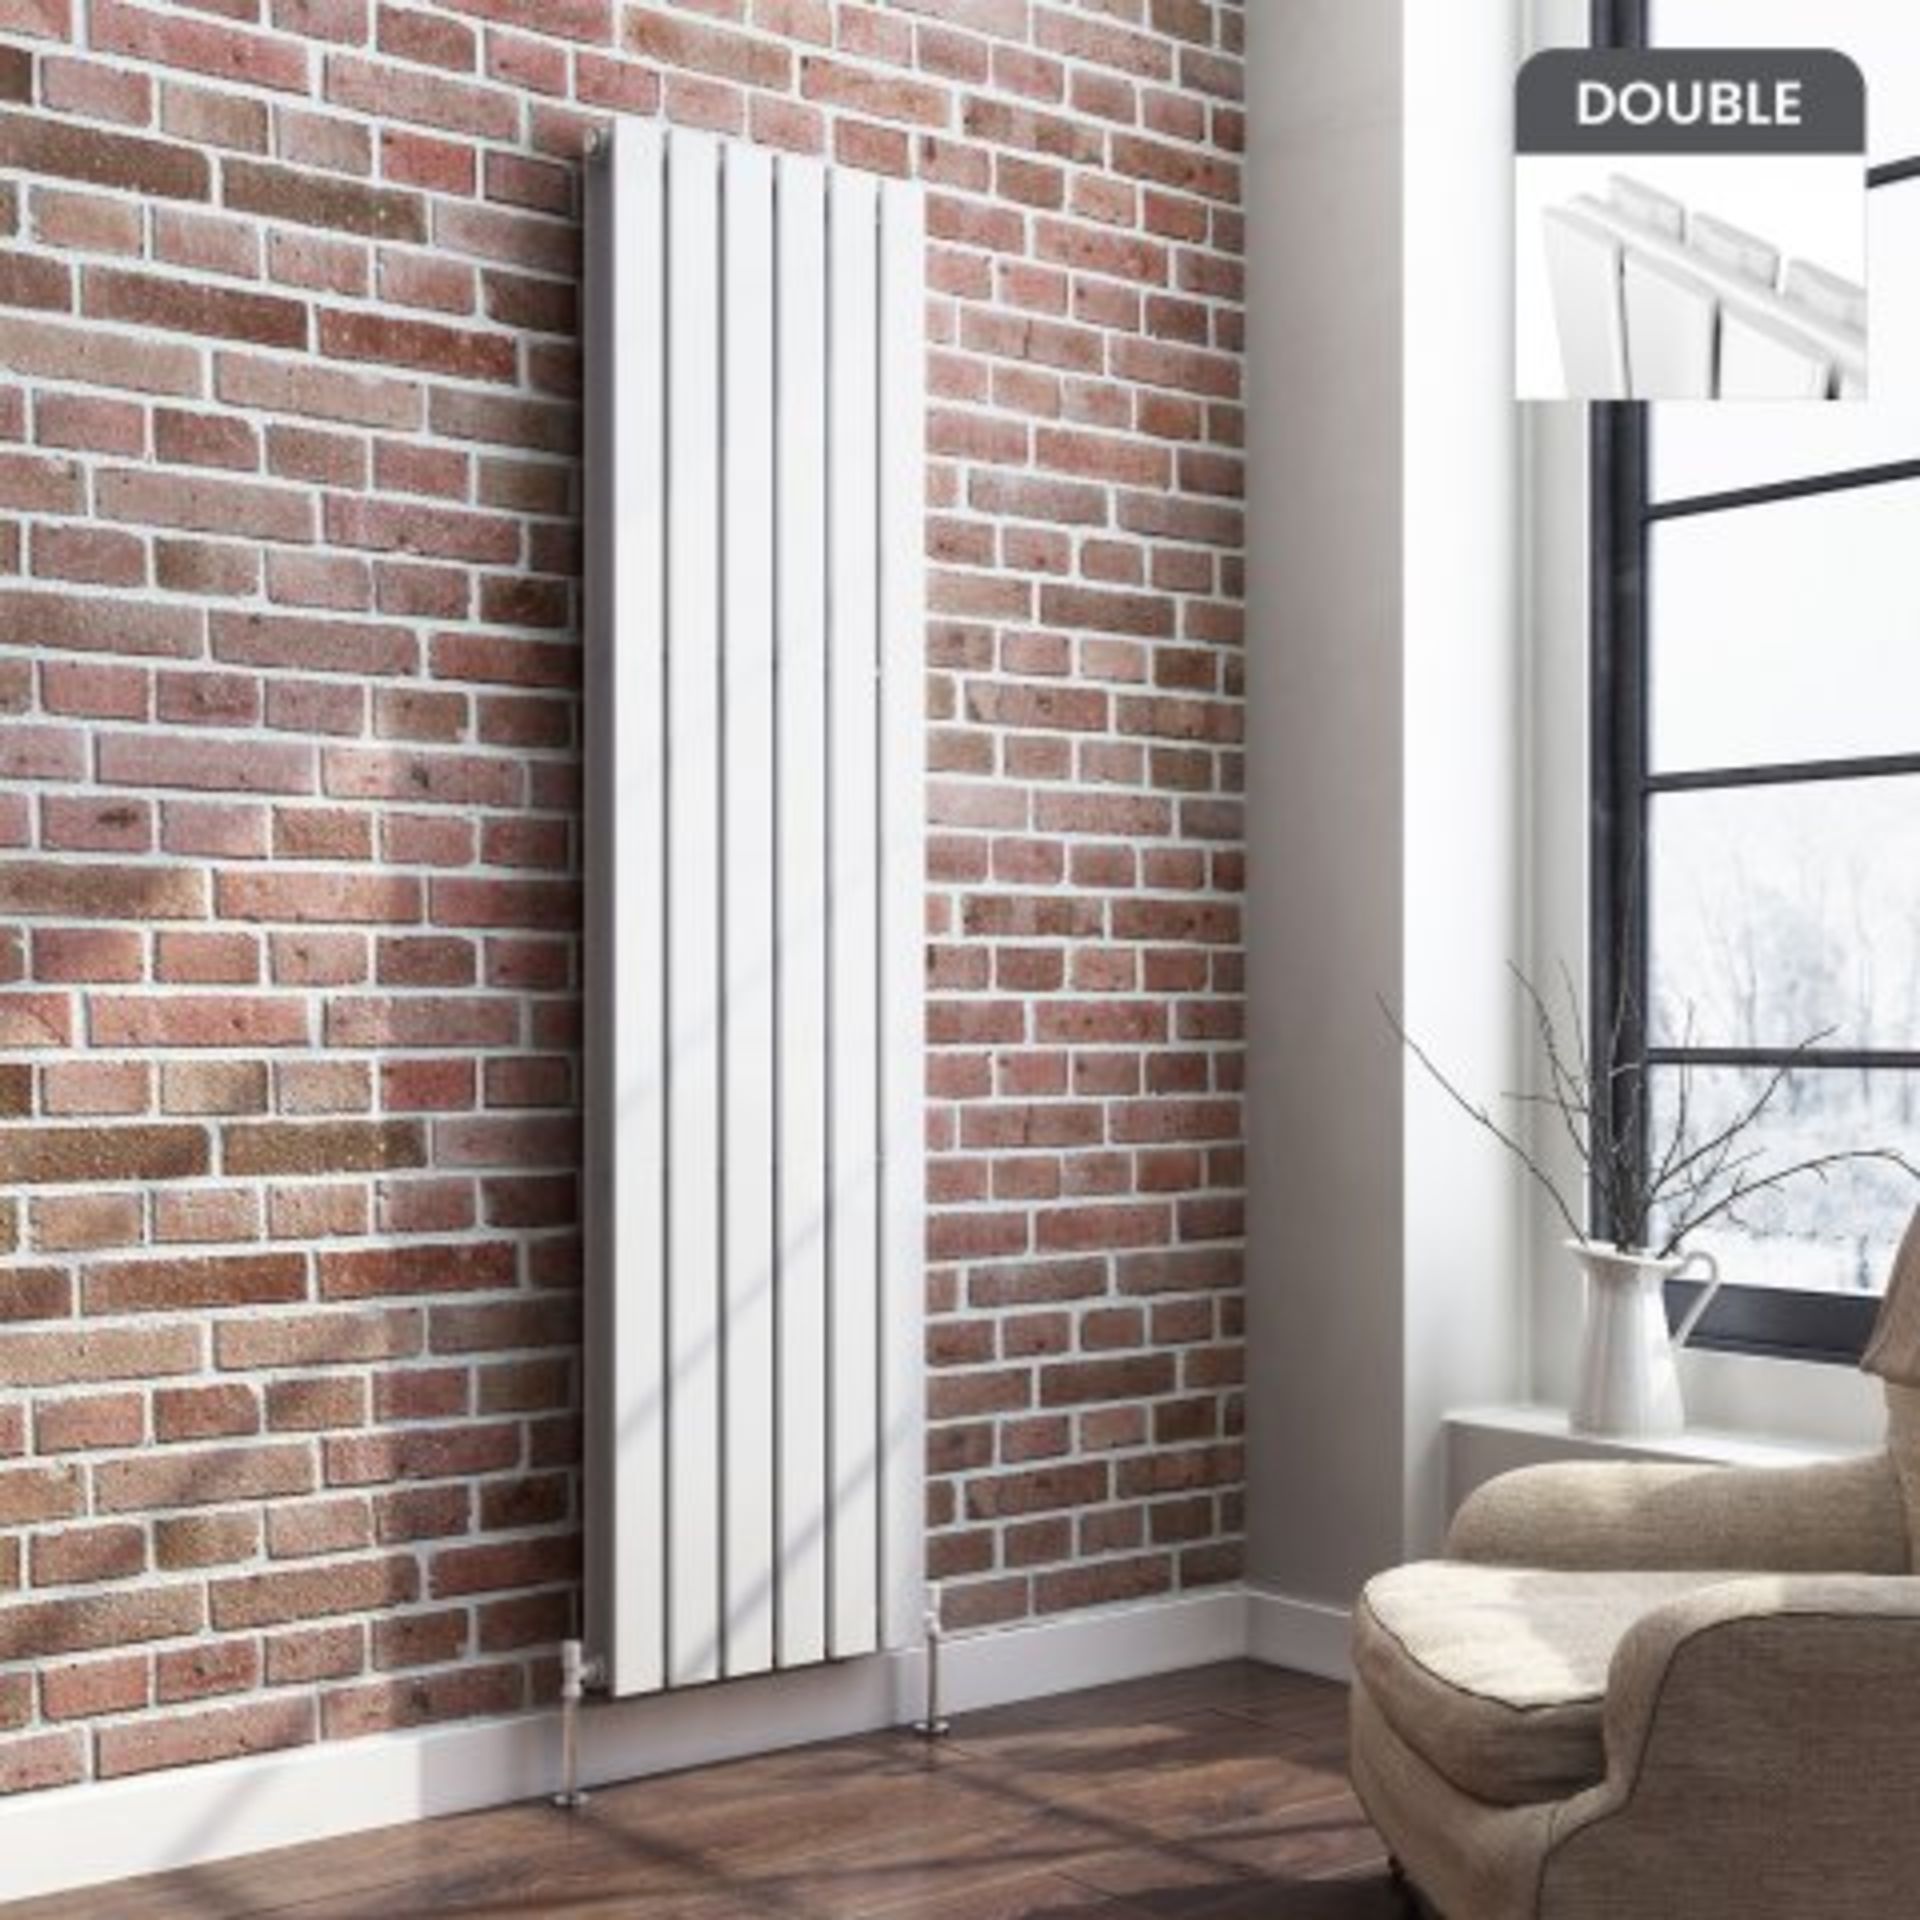 (A24) 1800x452mm Gloss White Double Flat Panel Vertical Radiator RRP £674.99. Attention to detail is